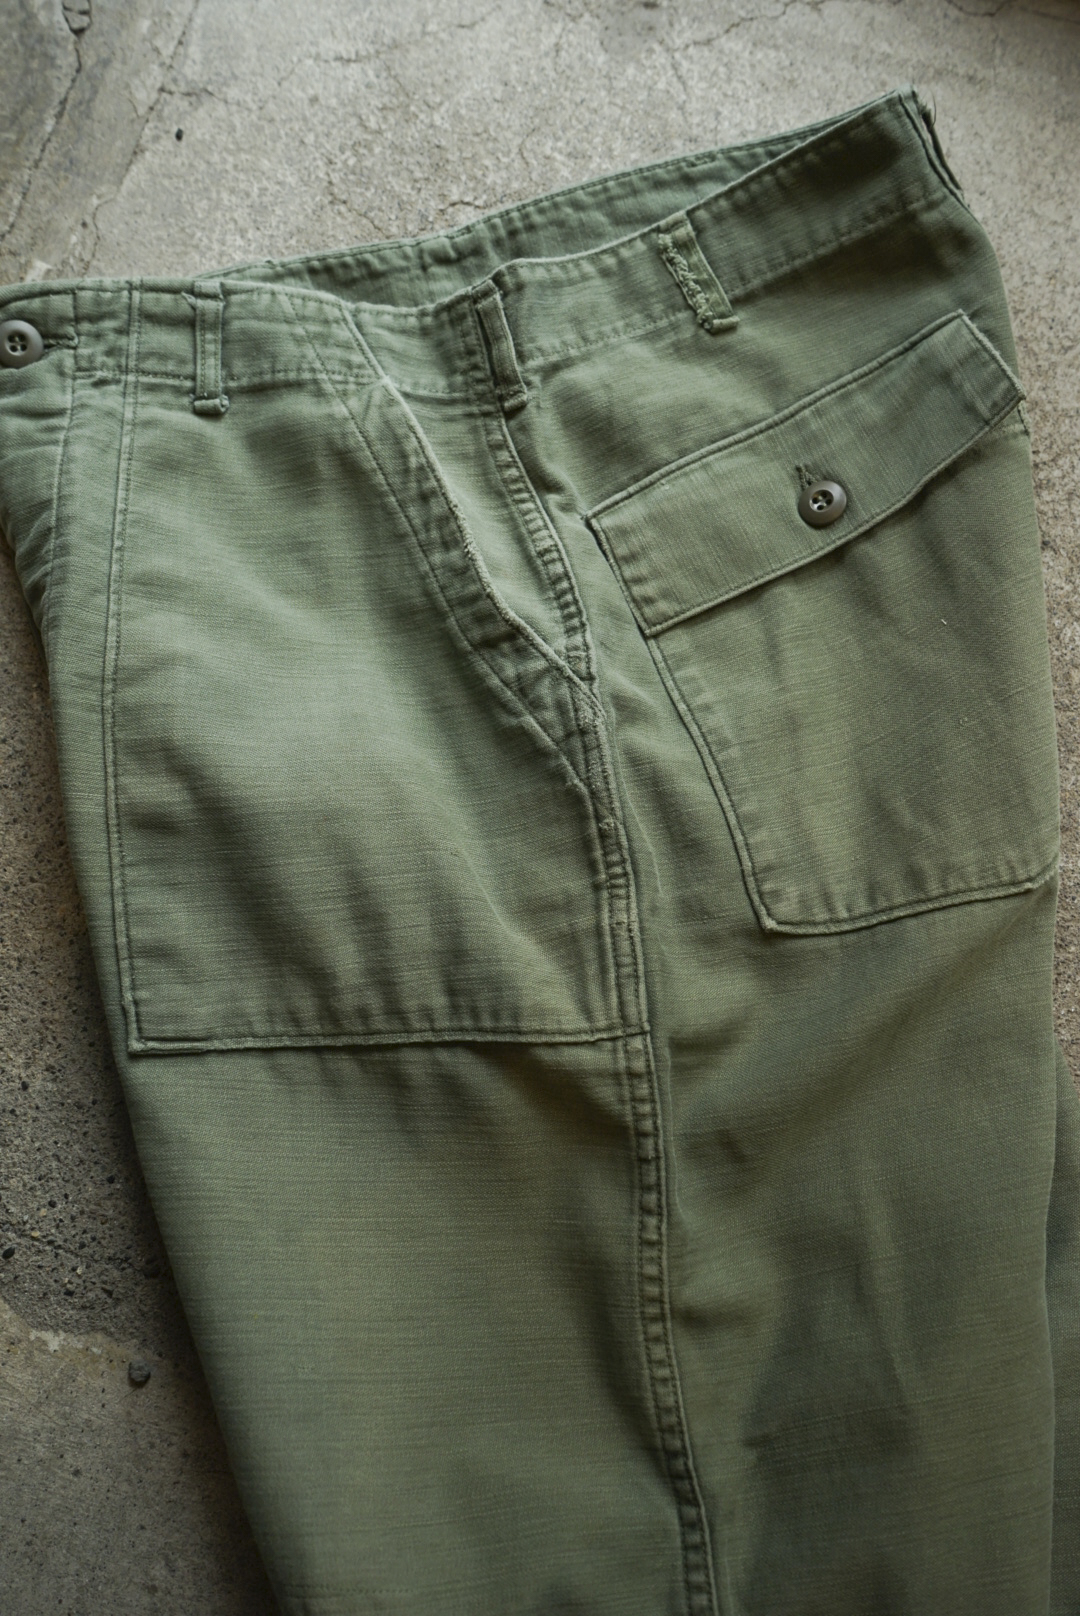 US ARMY BAKER PANTS REPAIRED 04